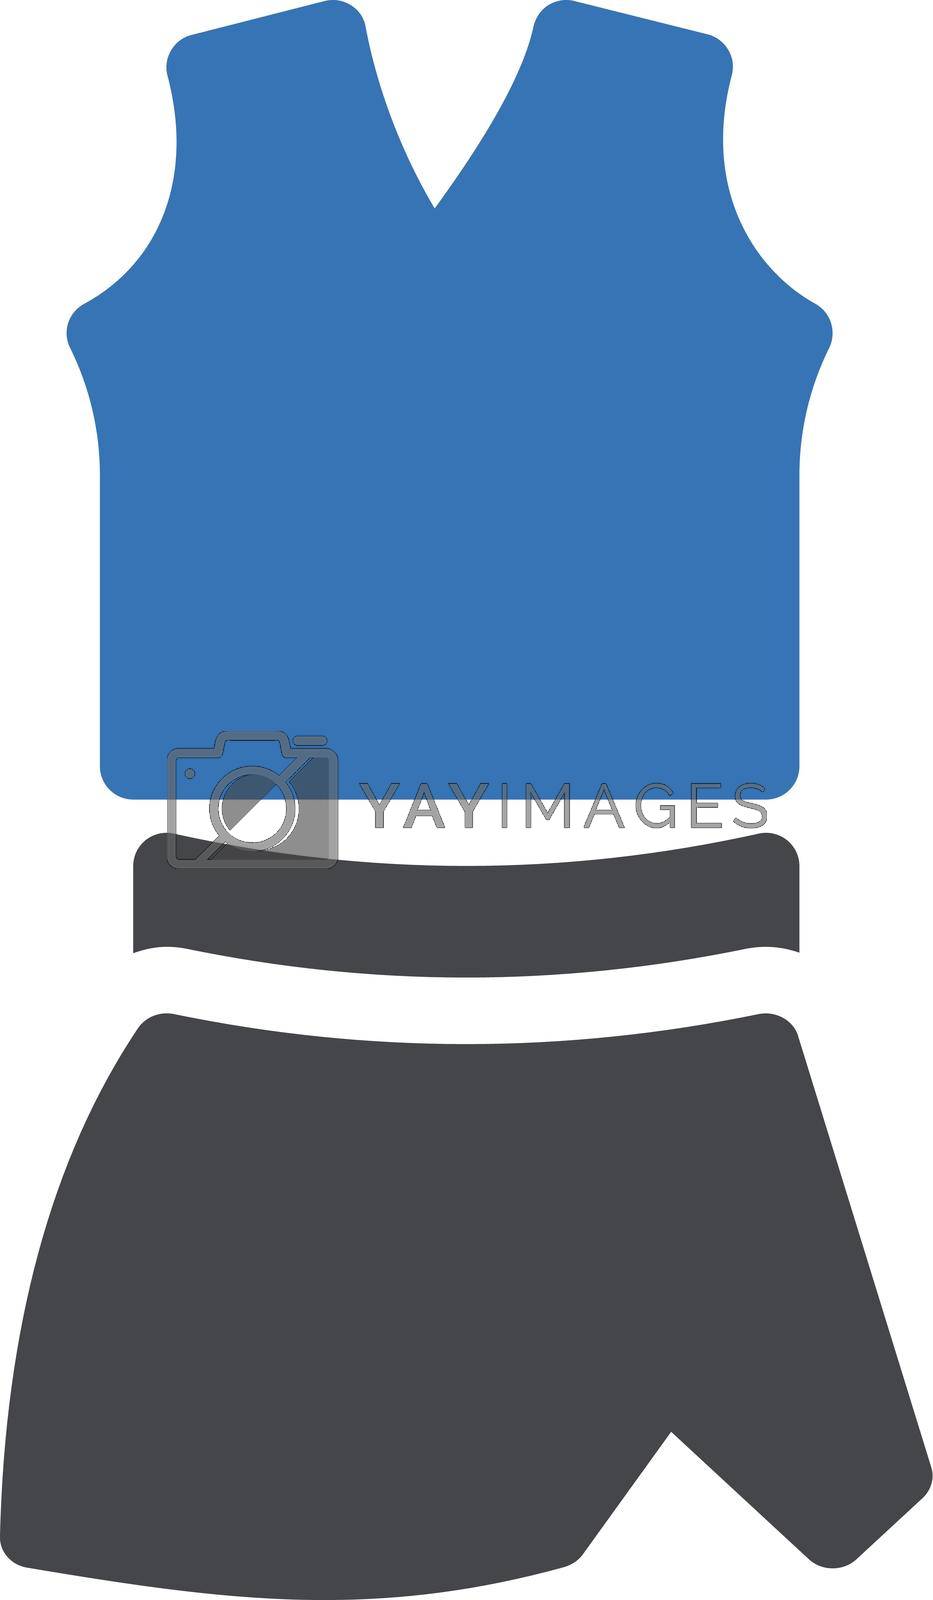 Royalty free image of uniform by vectorstall